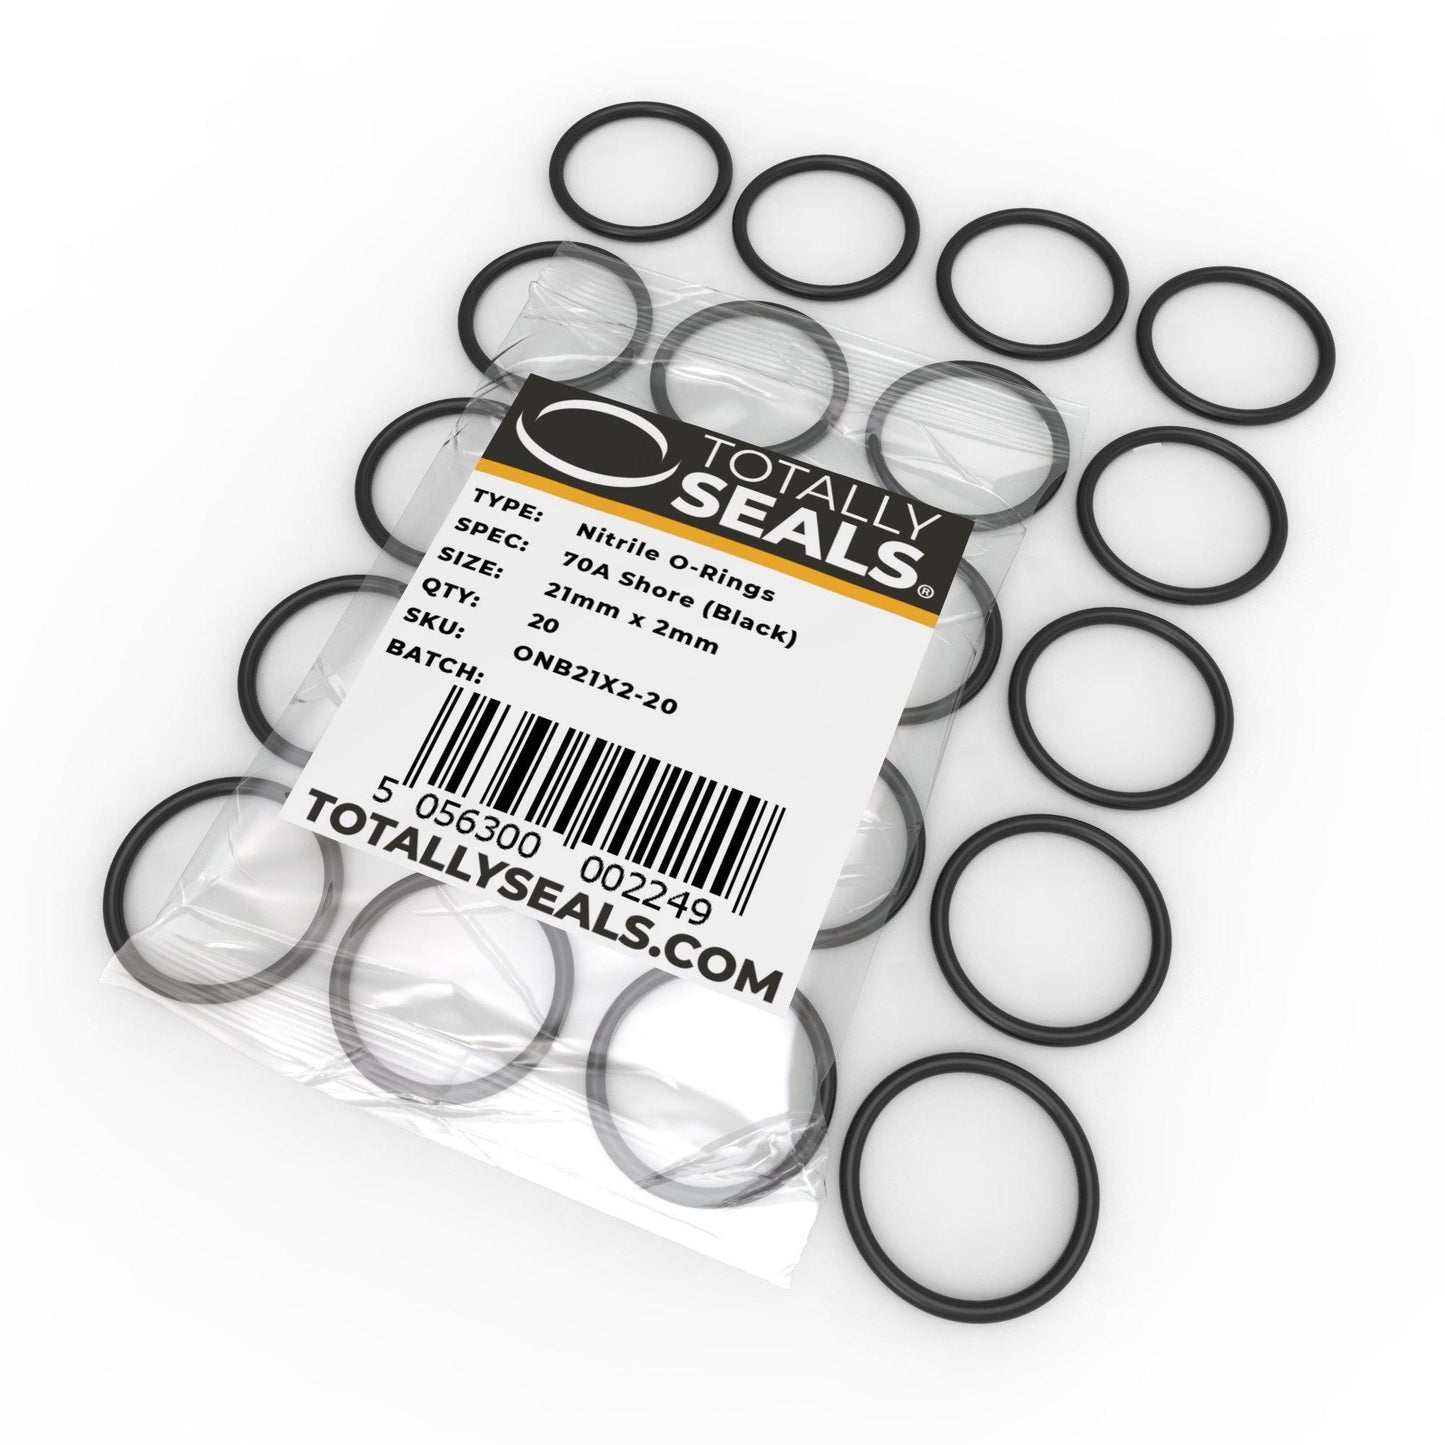 21mm x 2mm (25mm OD) Nitrile O-Rings - Totally Seals®